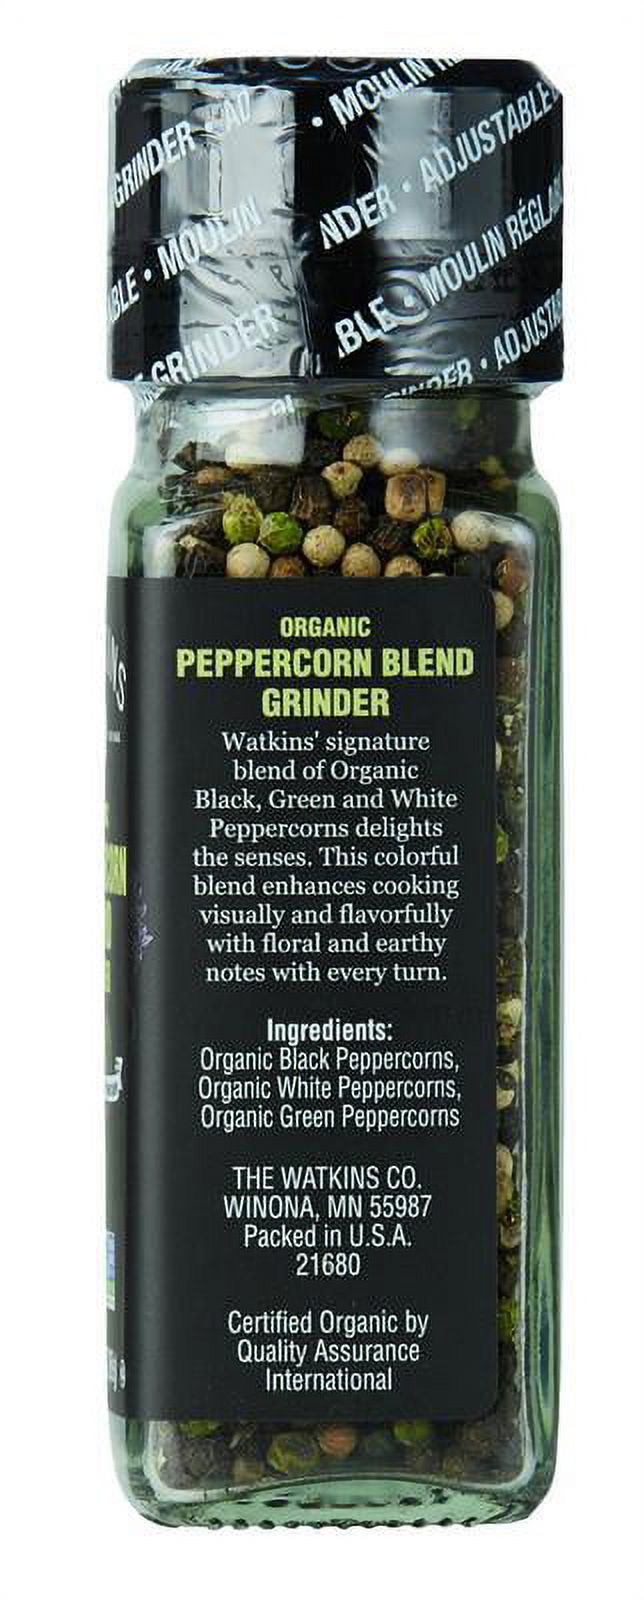 Watkins Gourmet Organic Spice Grinder, Peppercorn Blend, 2.4 oz (Glass Container, Shelf Stable, Fish-Free) - image 3 of 9